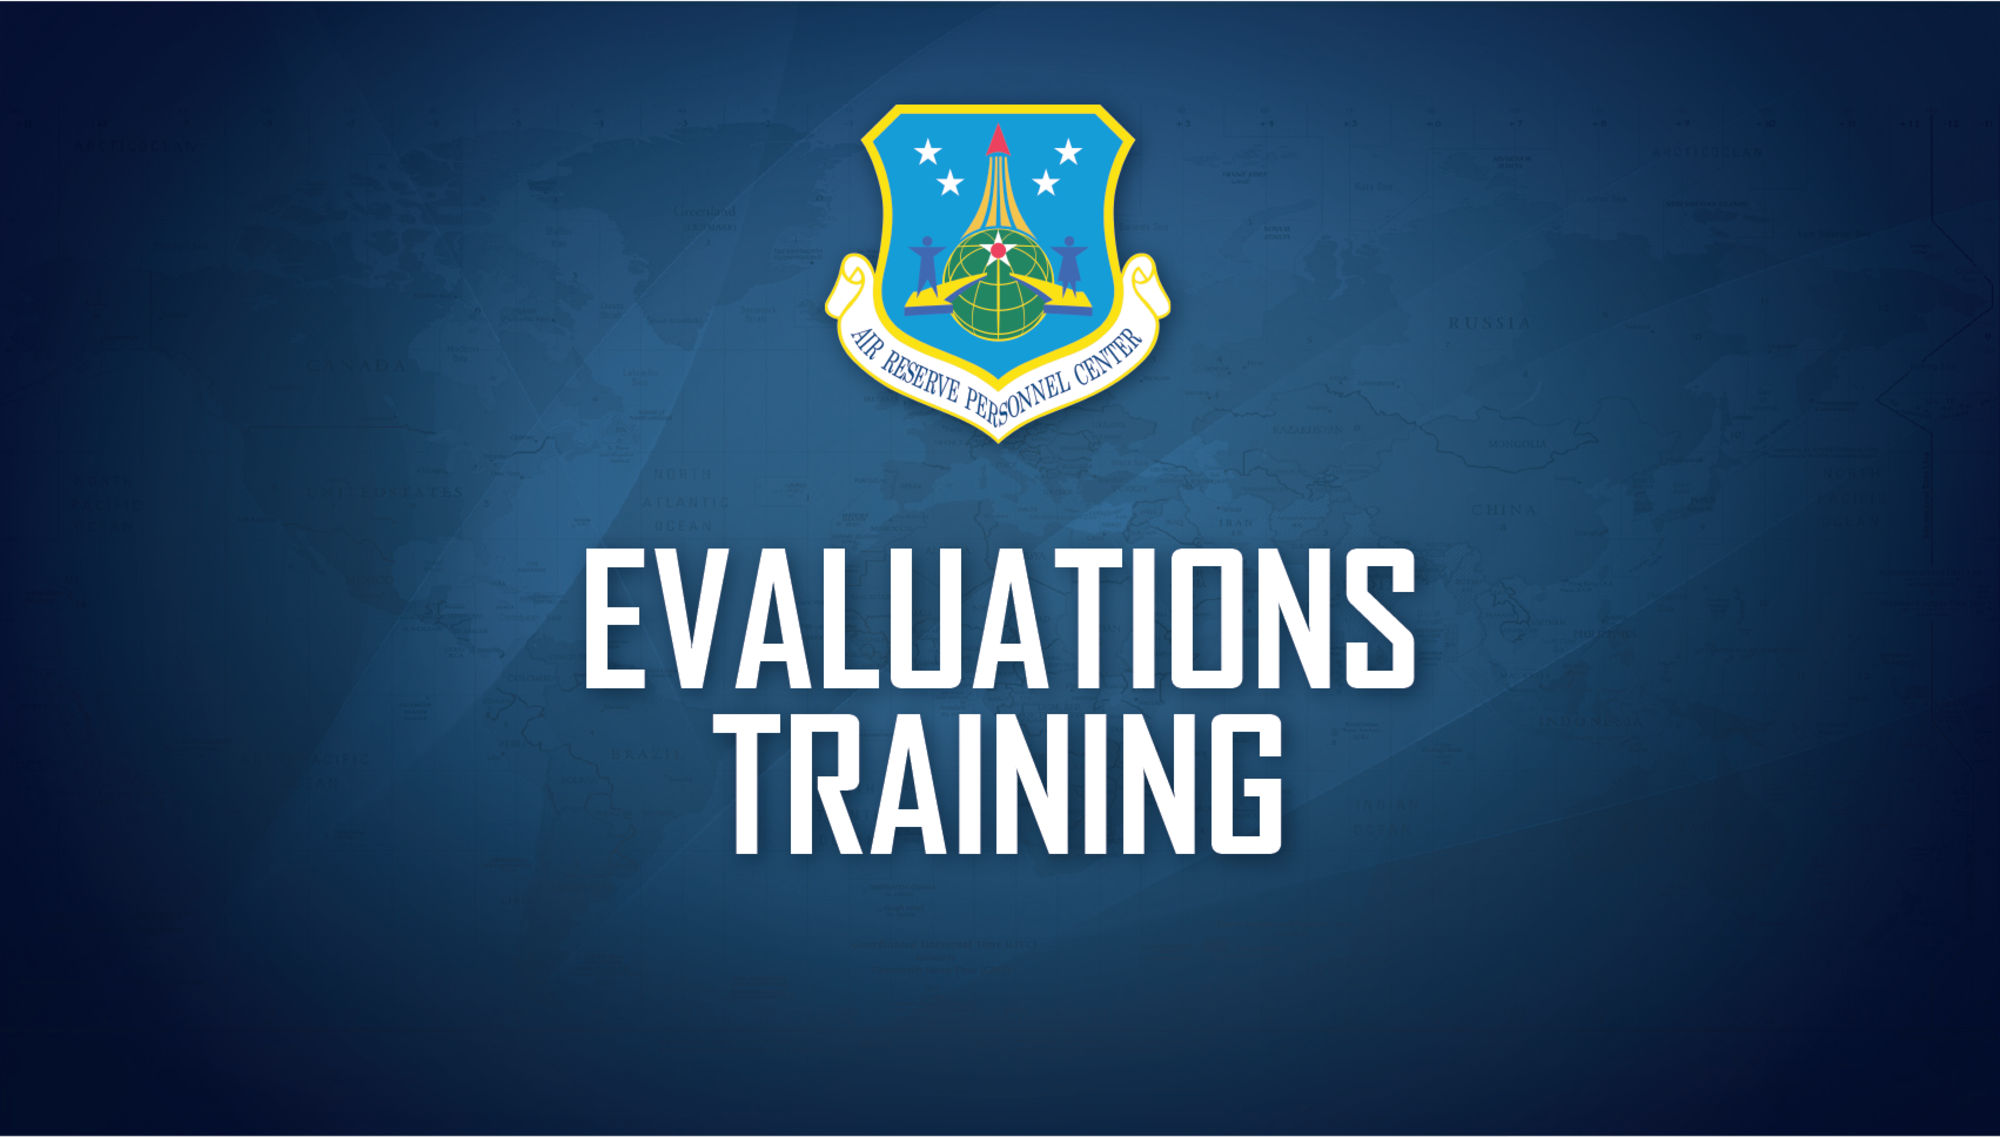 The Headquarters Air Reserve Personnel Center's Evaluations branch virtually delivered training to 332 fellow service members and civilian employees on Jan. 20, 2021.